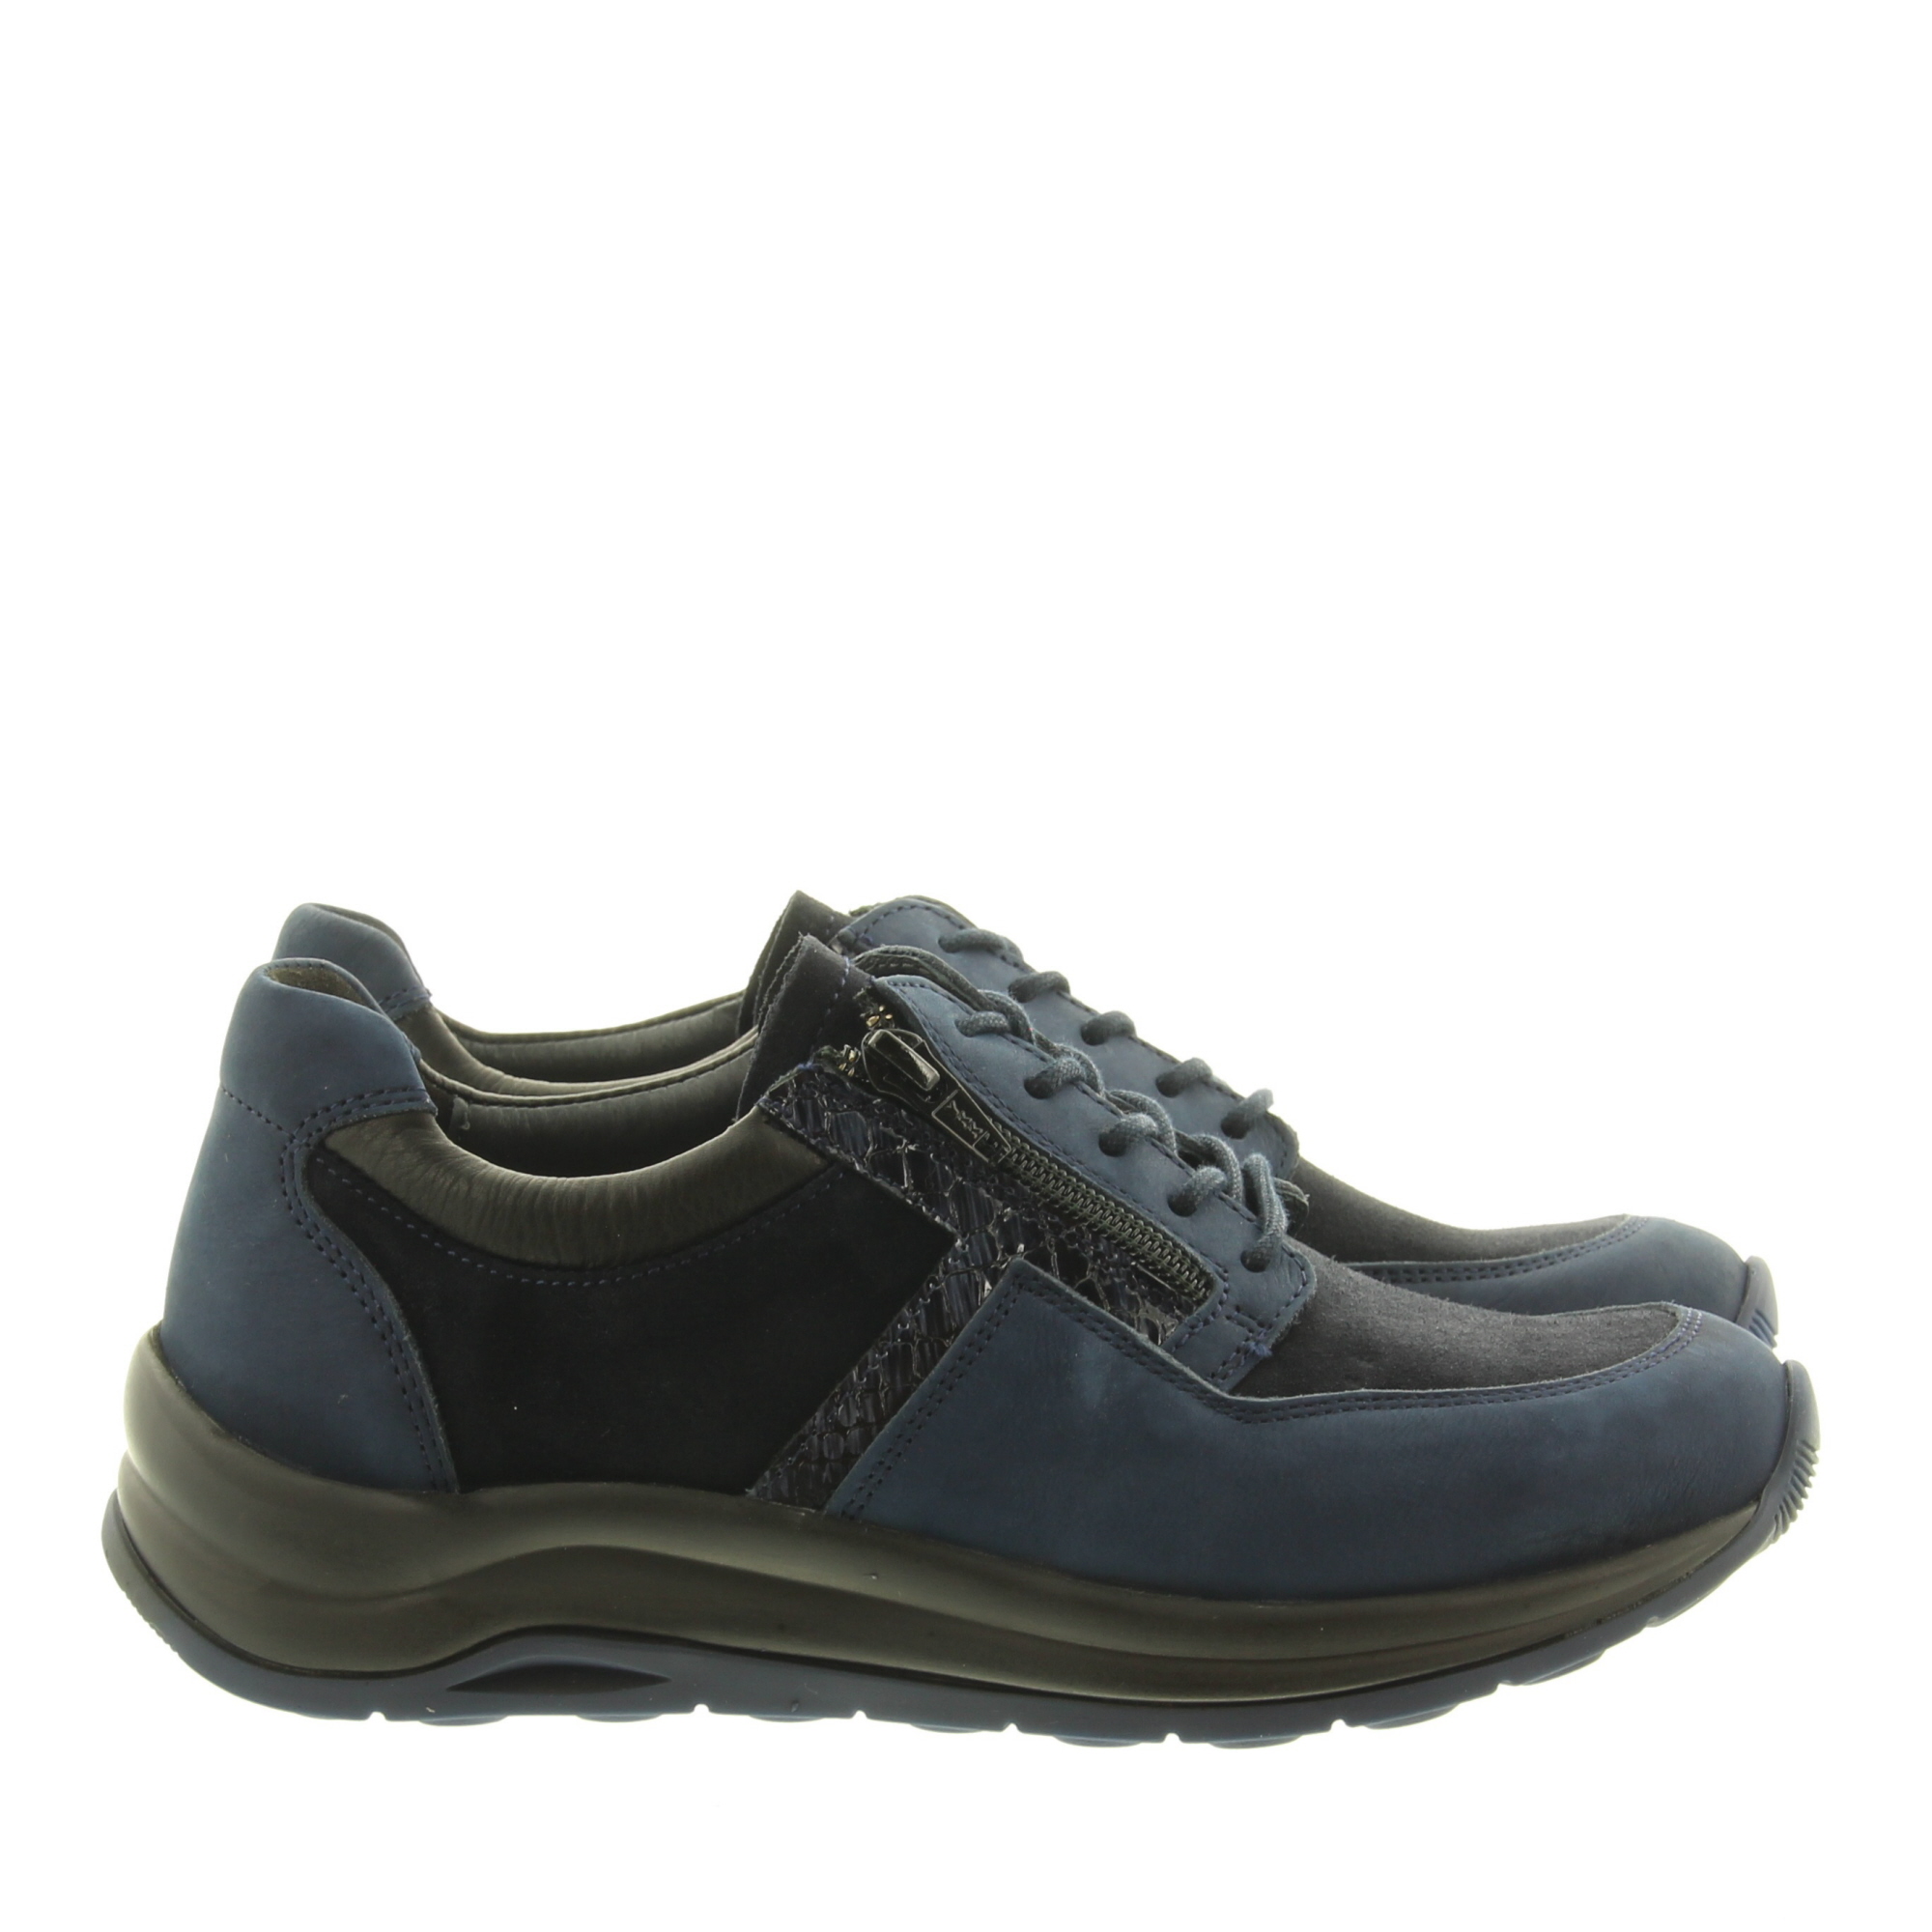 Wolky 0097991 Comrie leather combi 801 Blue